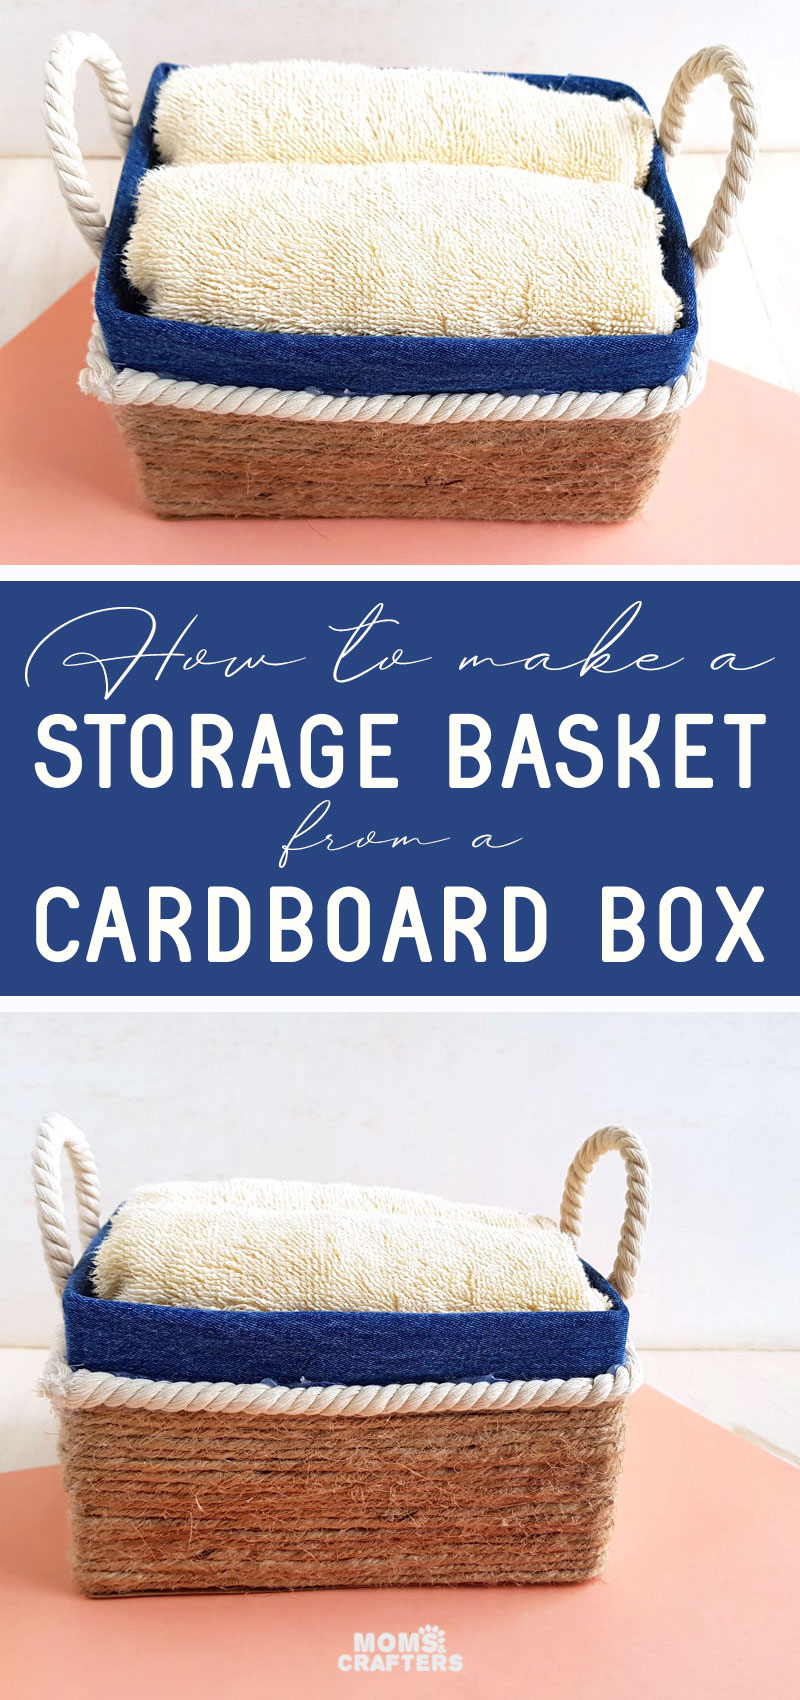 This DIY storage bin is made from a repurposed cardboard box! This fun upcycling craft is a great spring cleaning idea and home organization craft. Use old jeans, rope and sisal twine in this easy craft. 